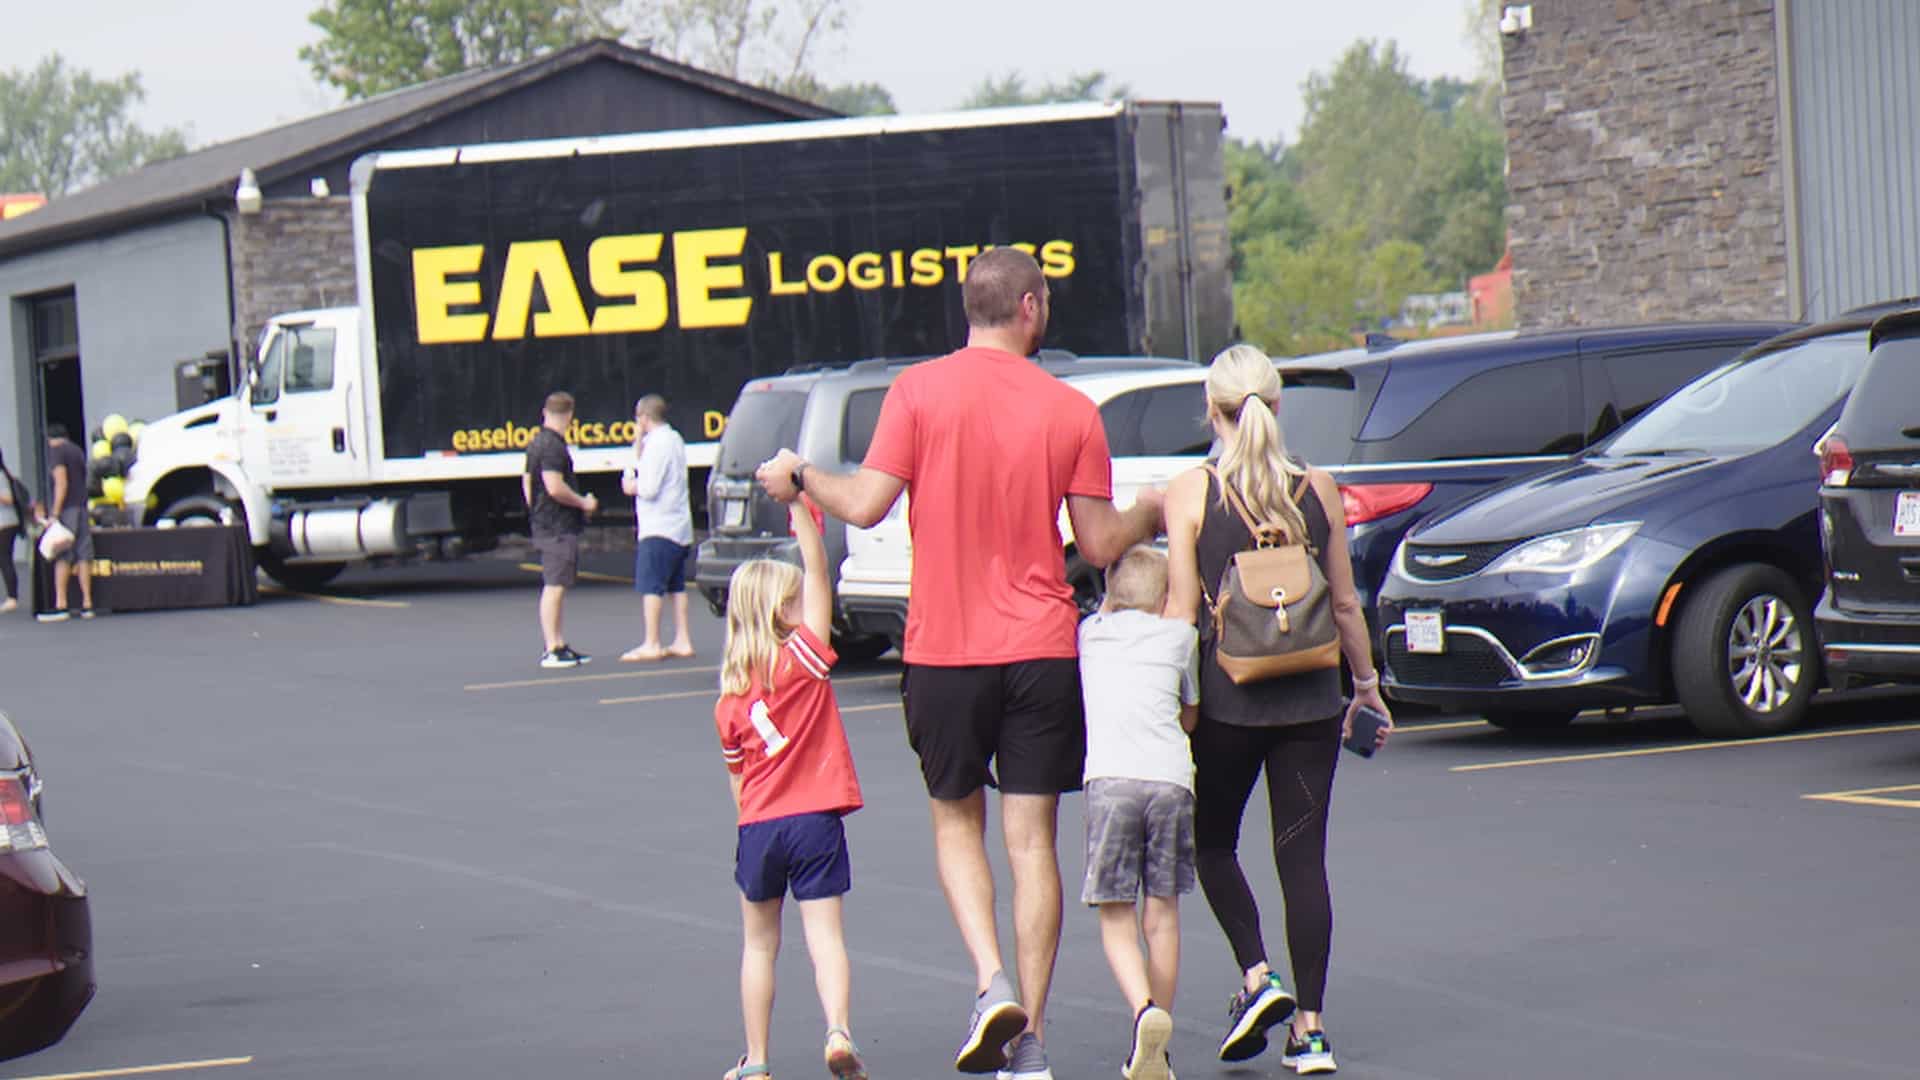 EASE Touch a truck Family Columbus on the Cheap